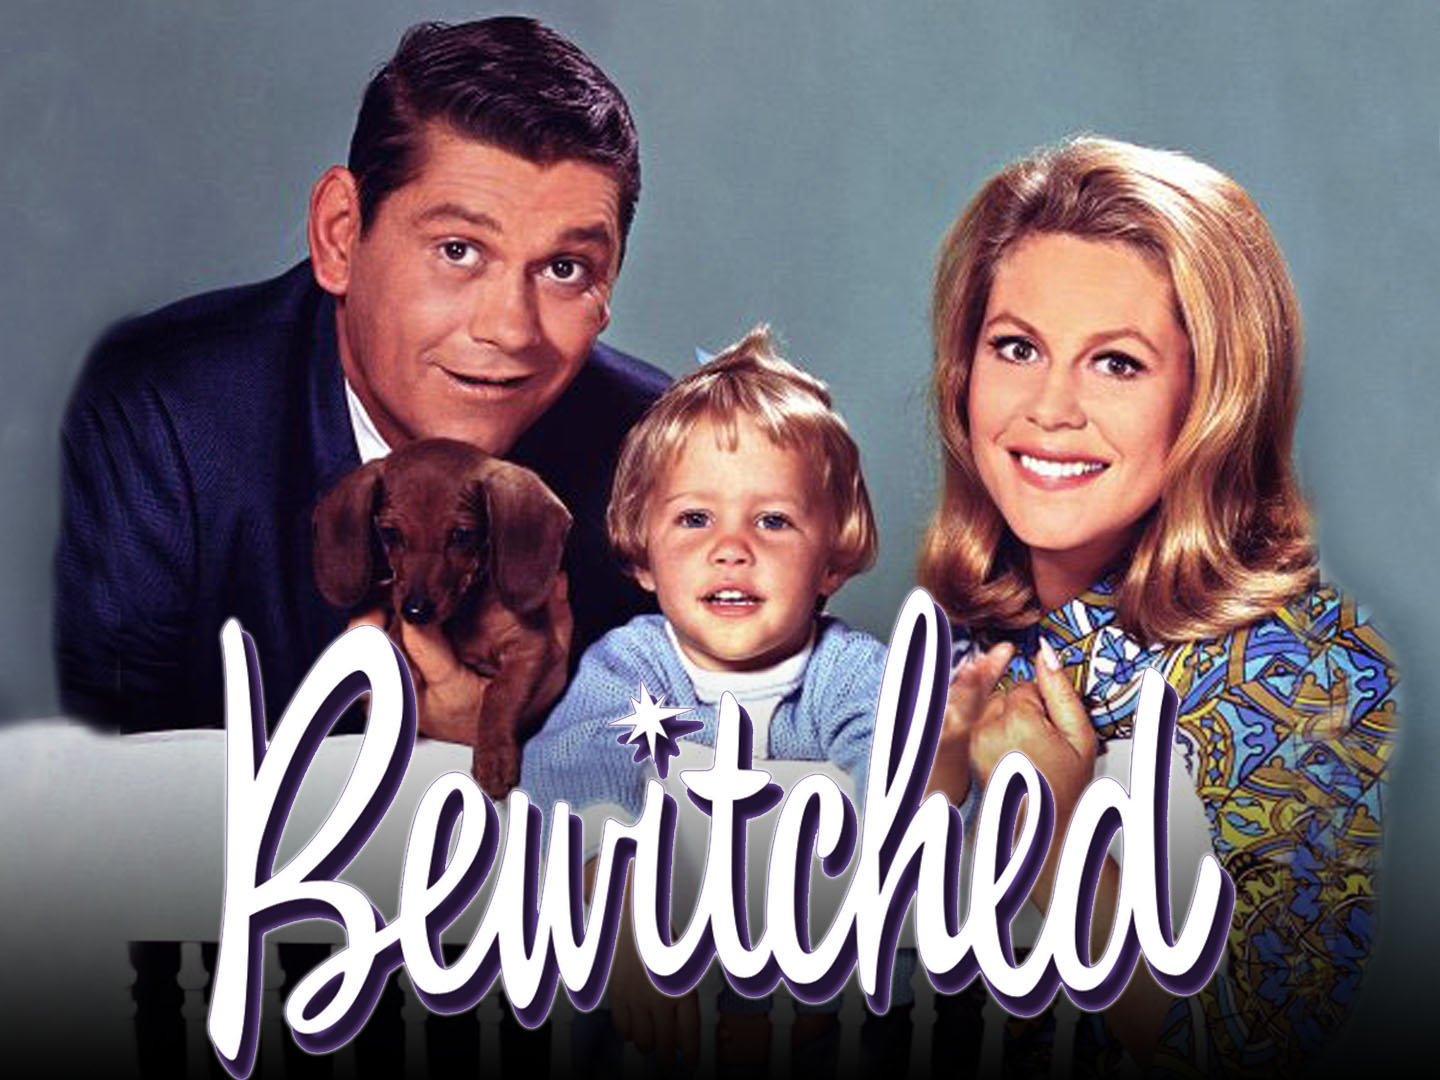 Classic TV Quiz: How Many Seasons Did These TV Shows Last? 14 bewitched